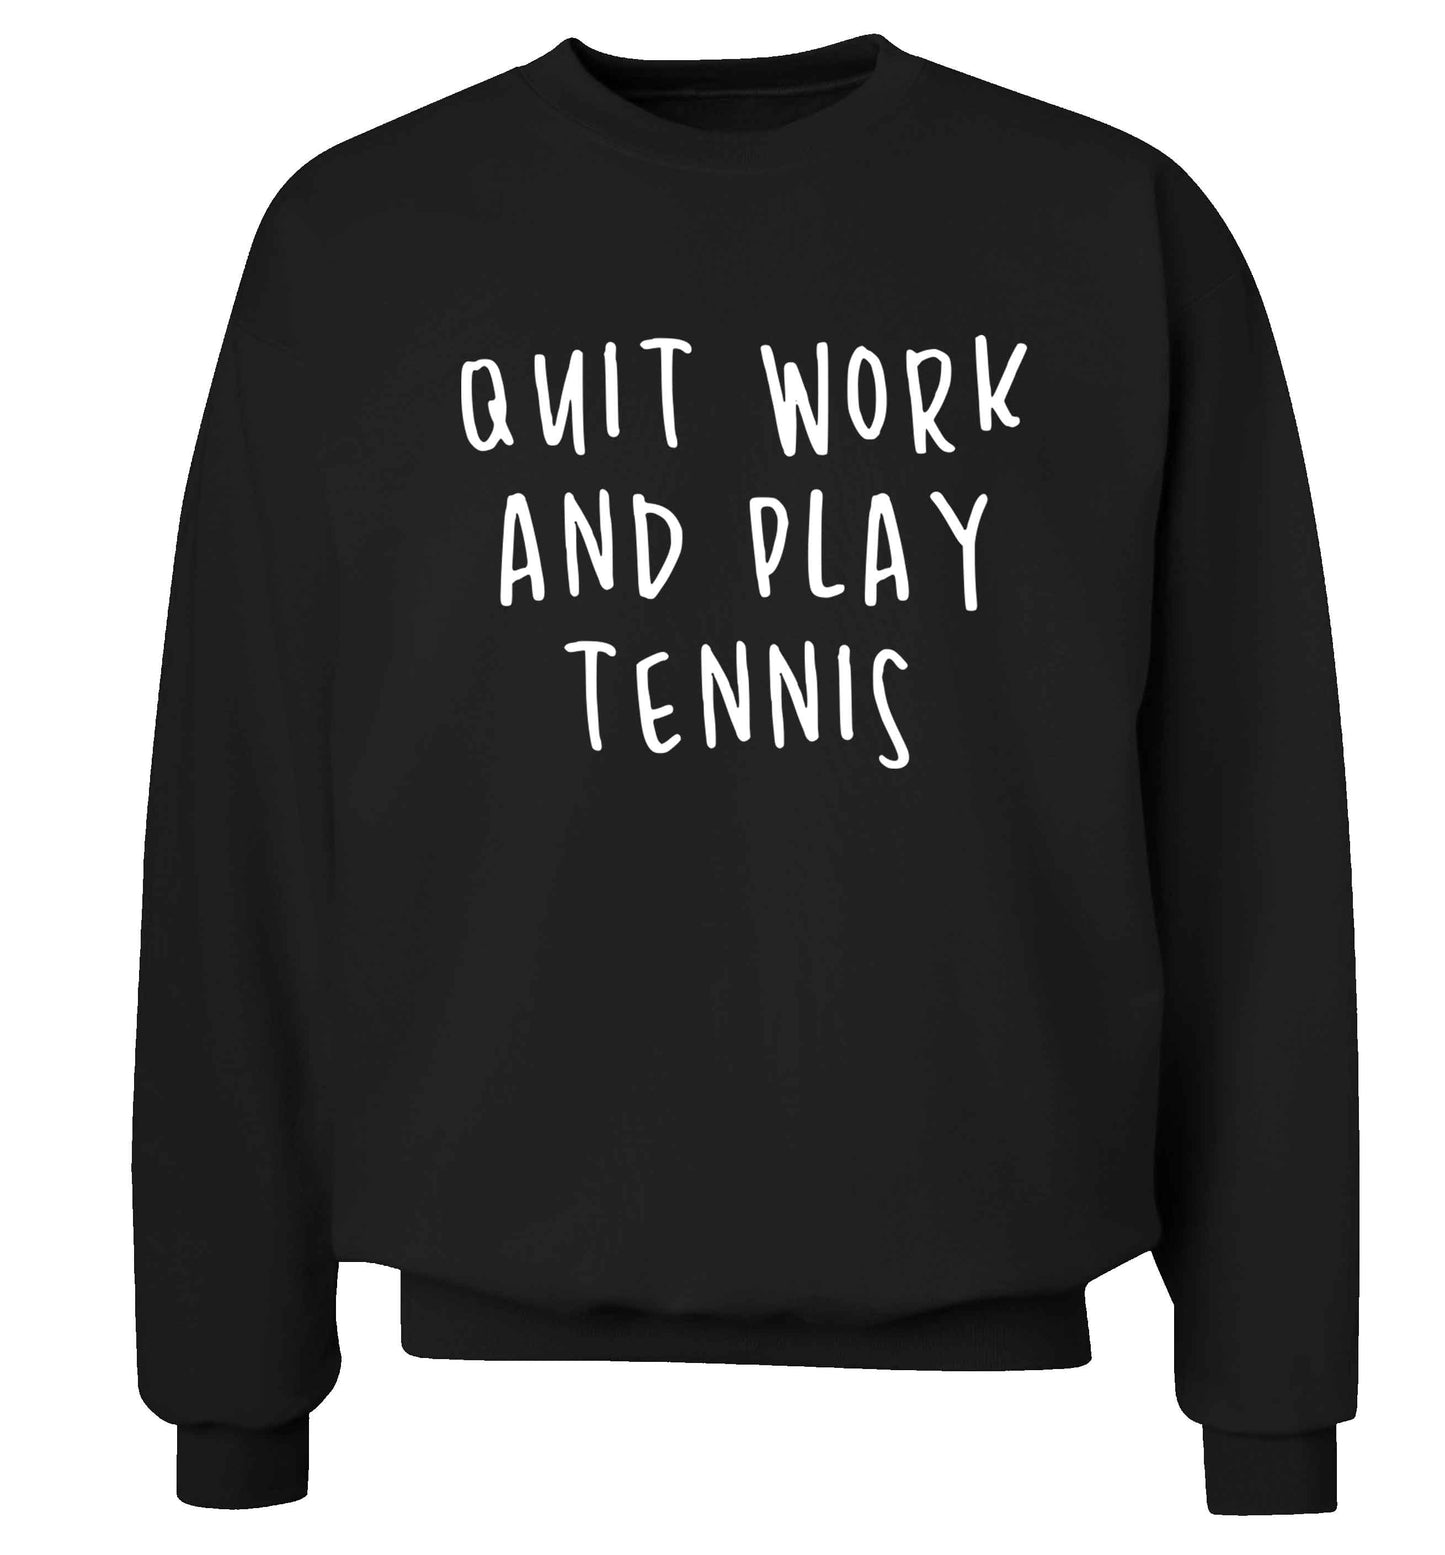 Quit work and play tennis Adult's unisex black Sweater 2XL